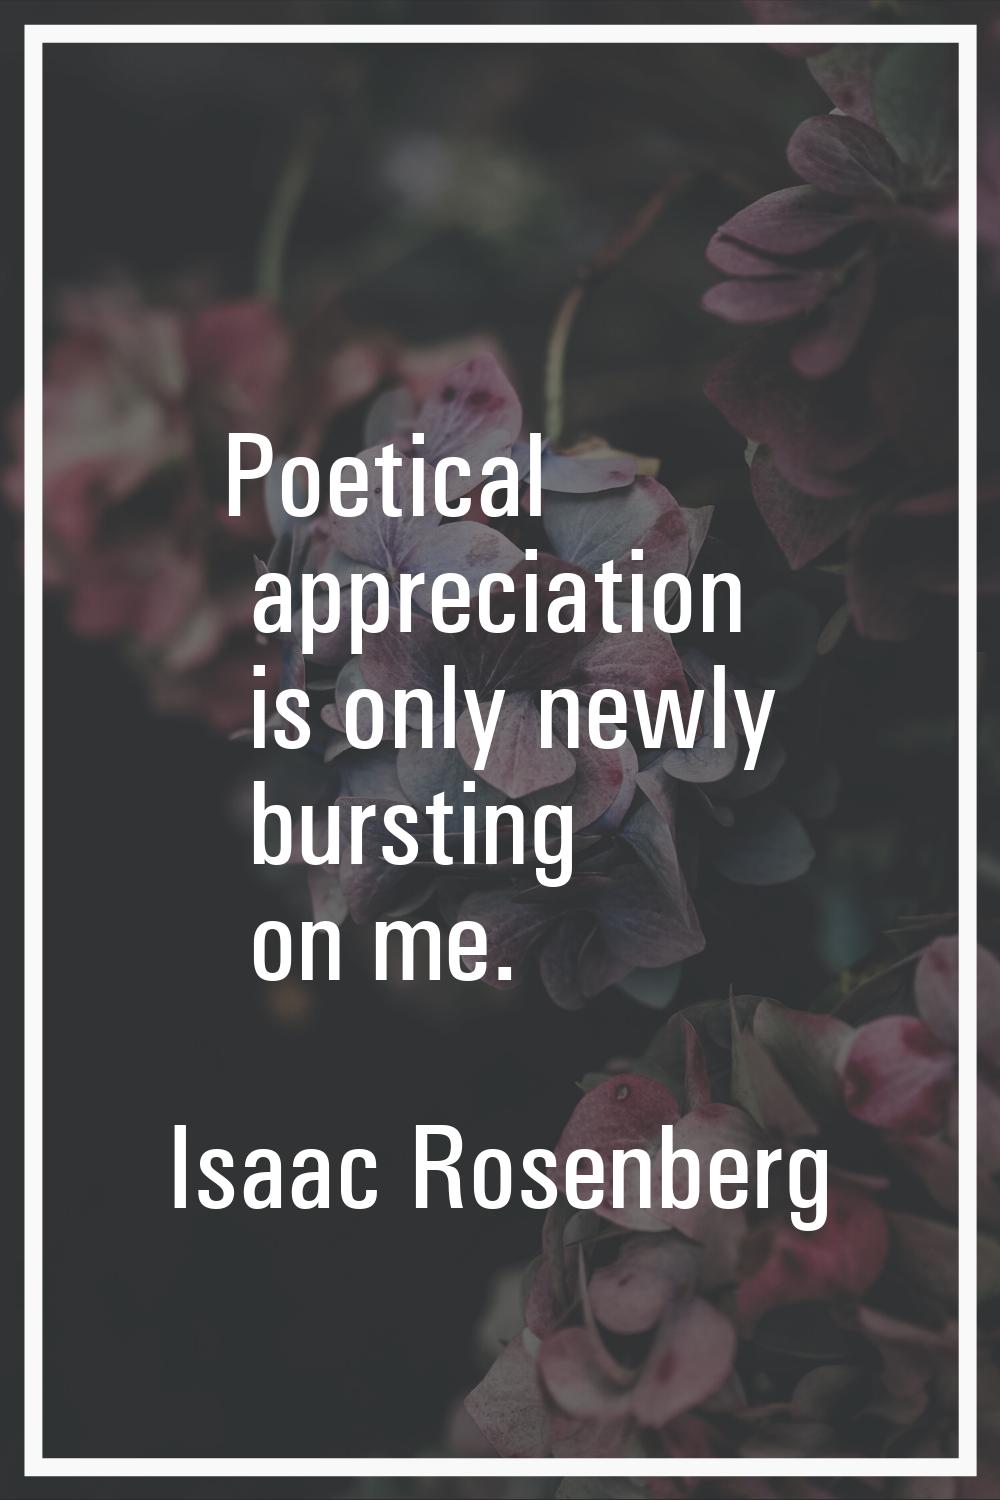 Poetical appreciation is only newly bursting on me.